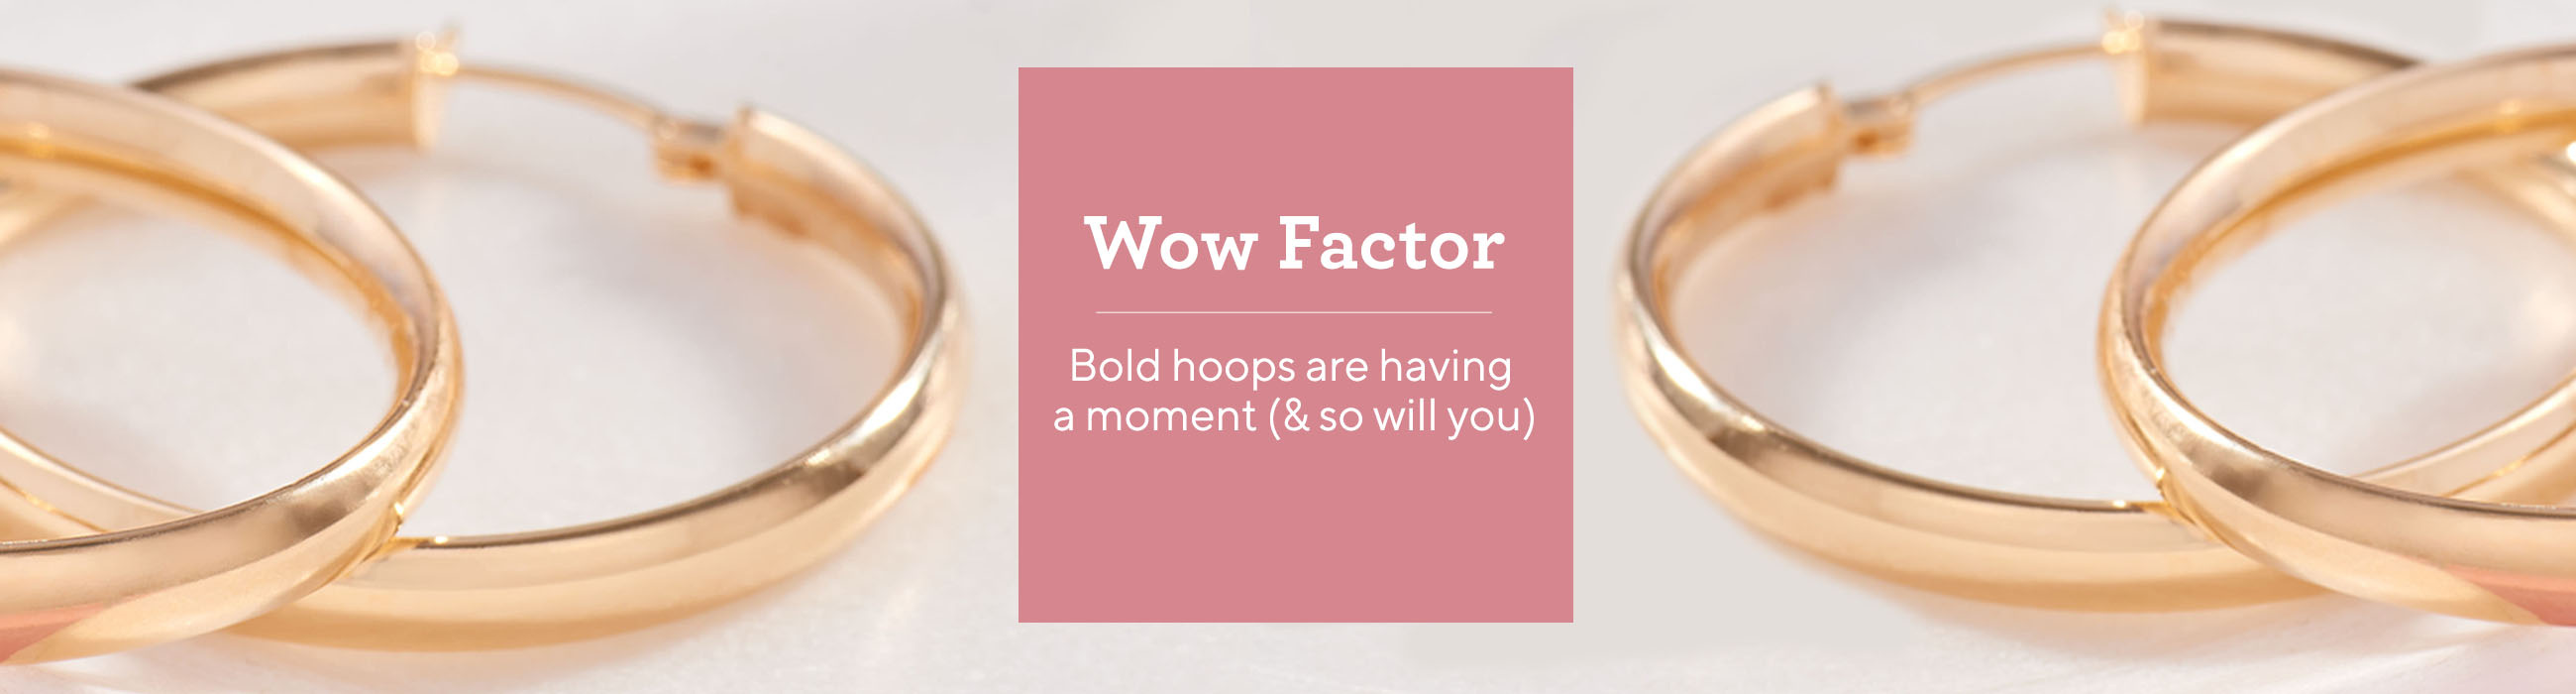 Wow Factor  Bold hoops are having a moment (& so will you)